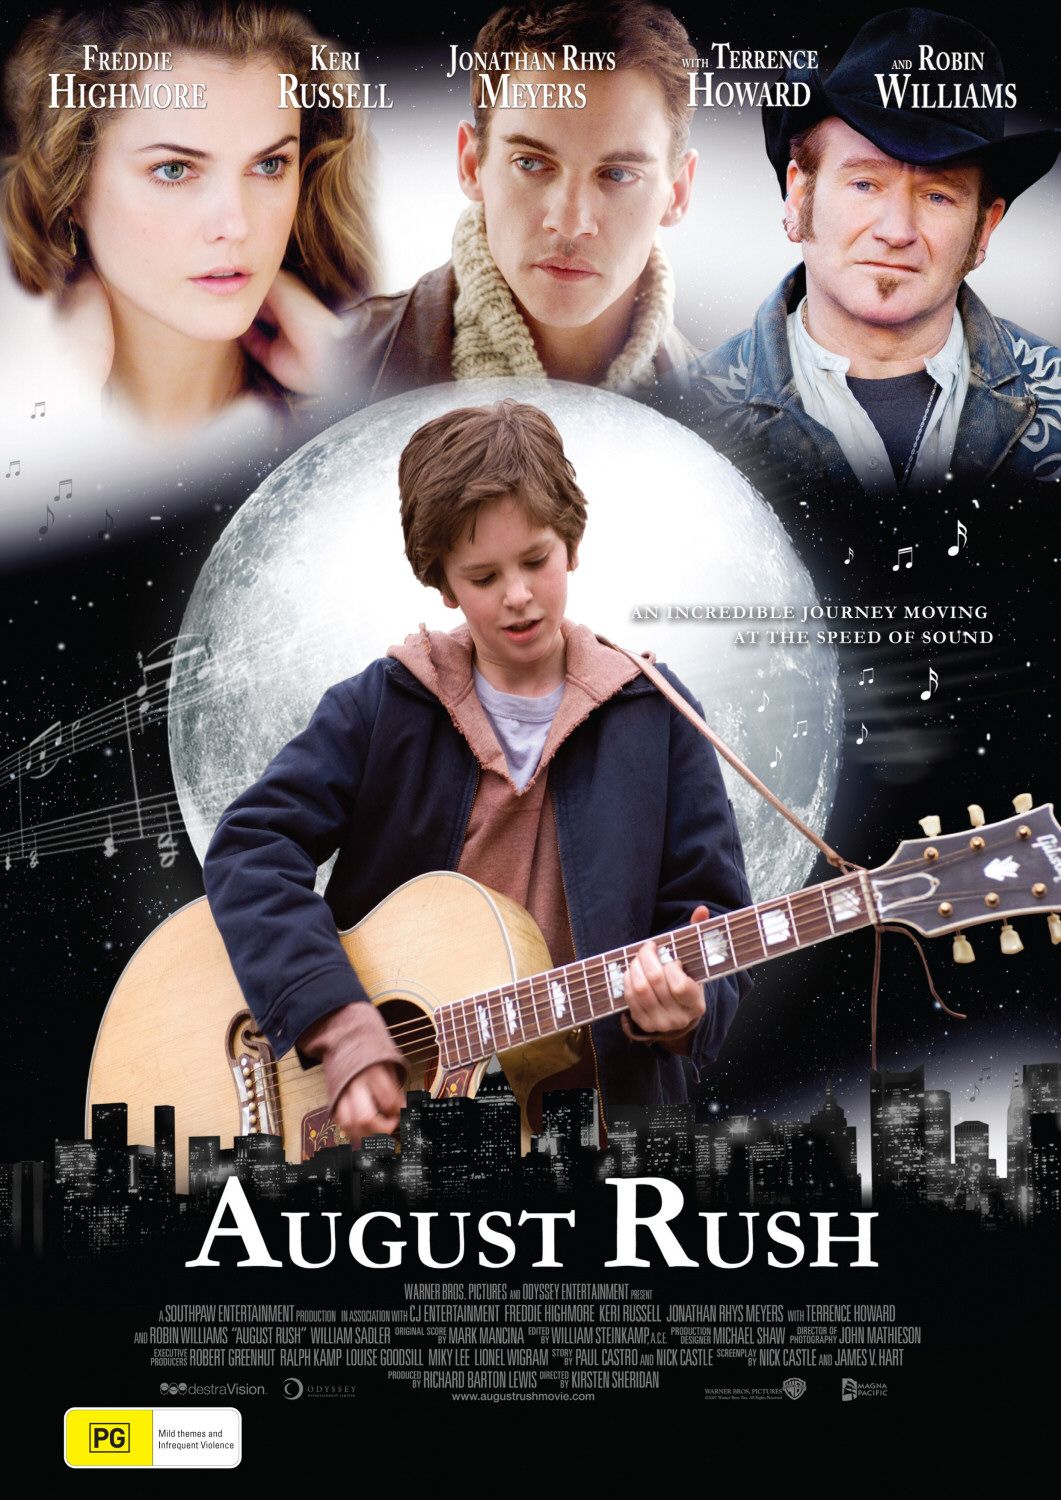 August Rush (6 of 9) Extra Large Movie Poster Image IMP Awards